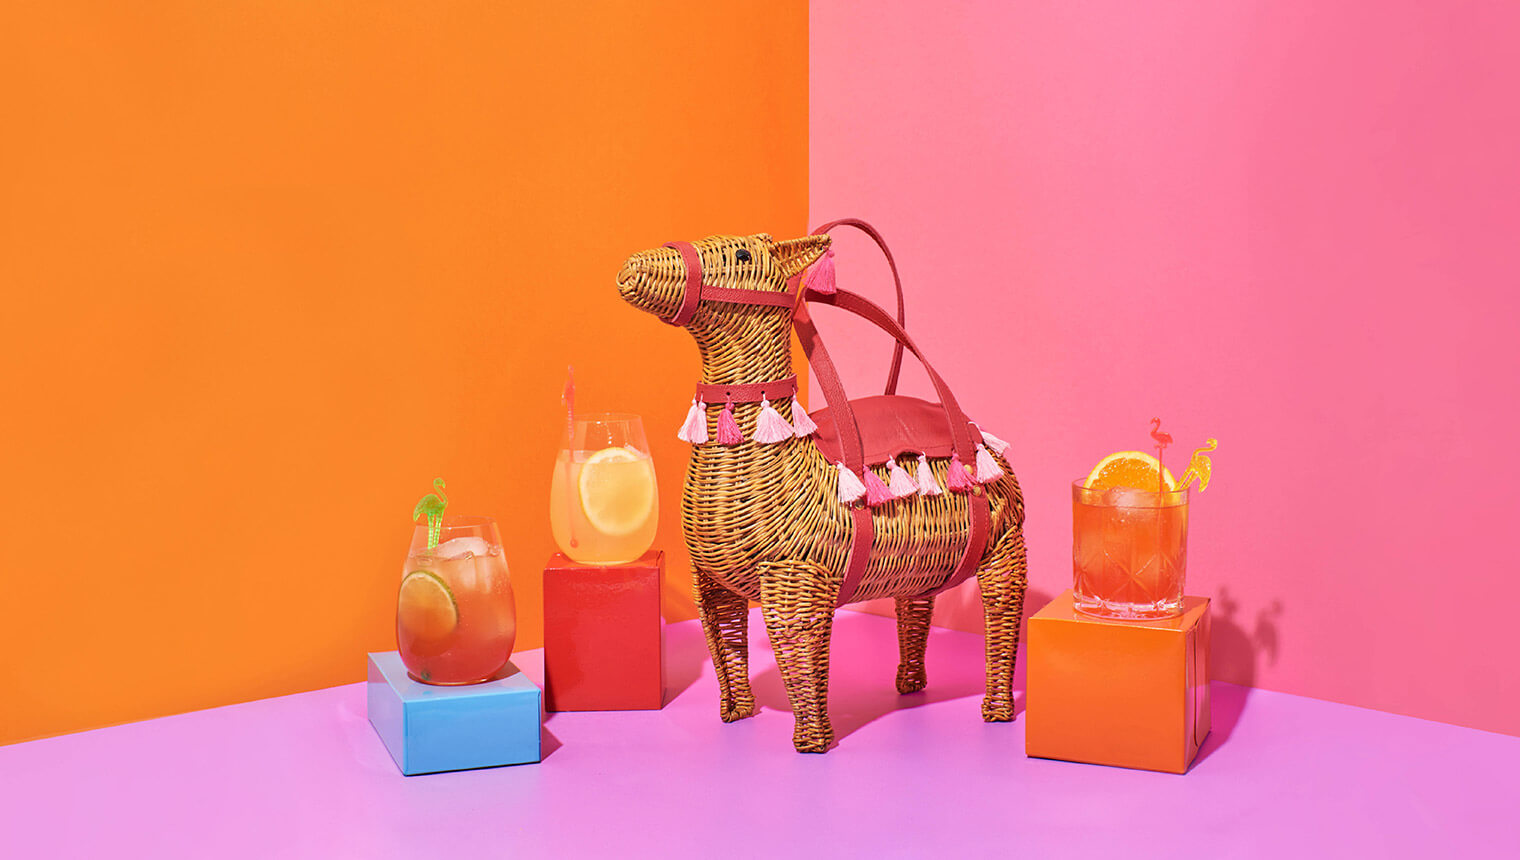 Bright orange and pink scene with llama shaped wicker handbag surrounded by cocktails